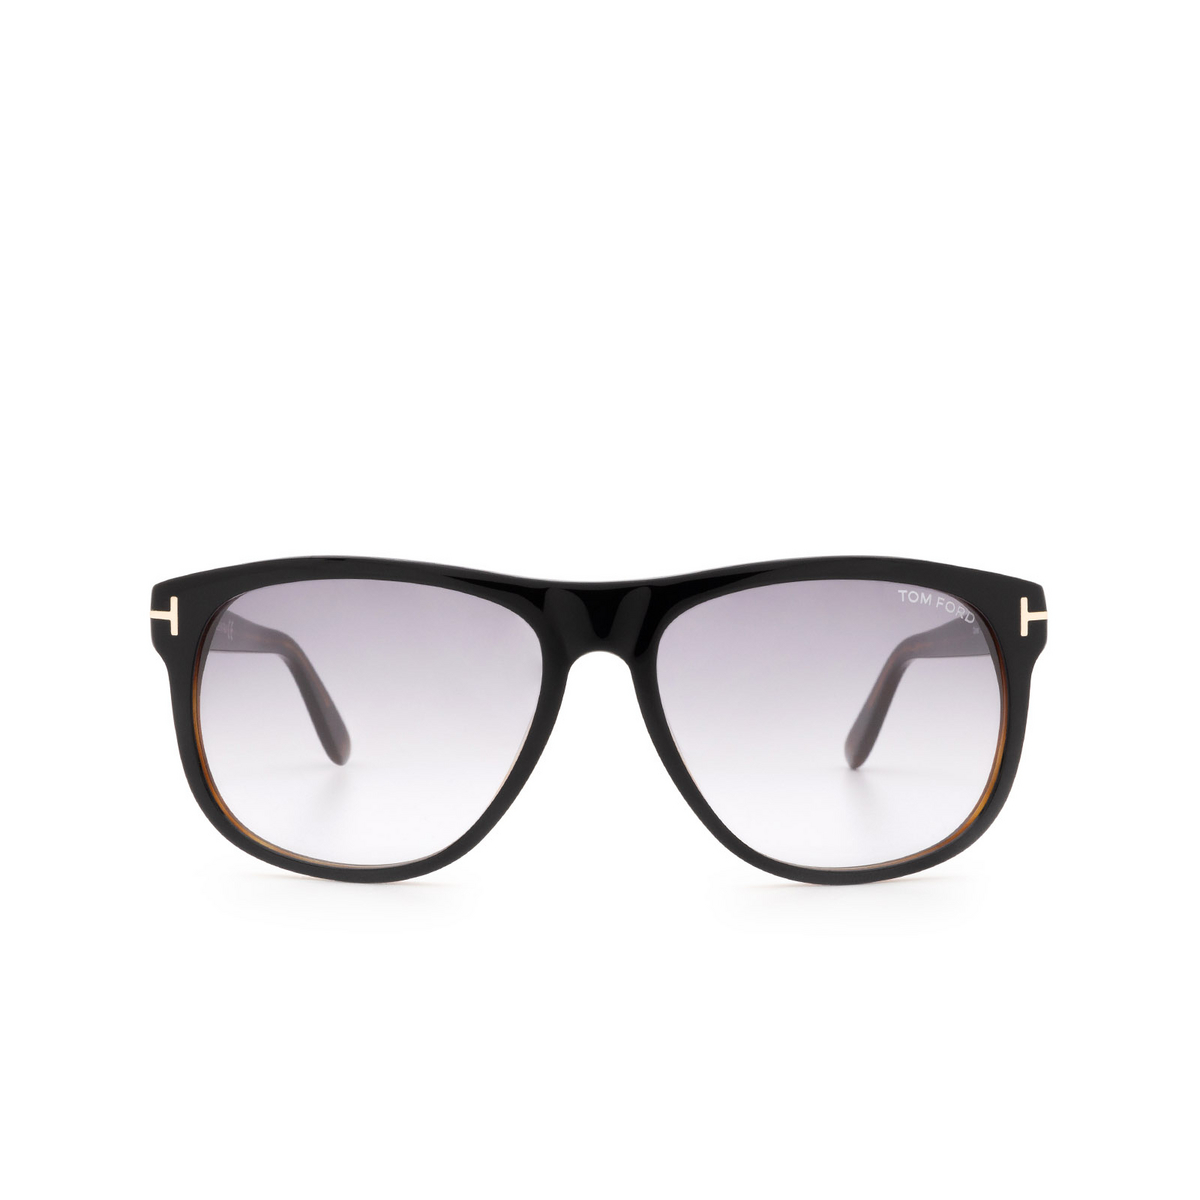 Tom Ford® Square Sunglasses: Olivier FT0236 color Black 05B - front view.